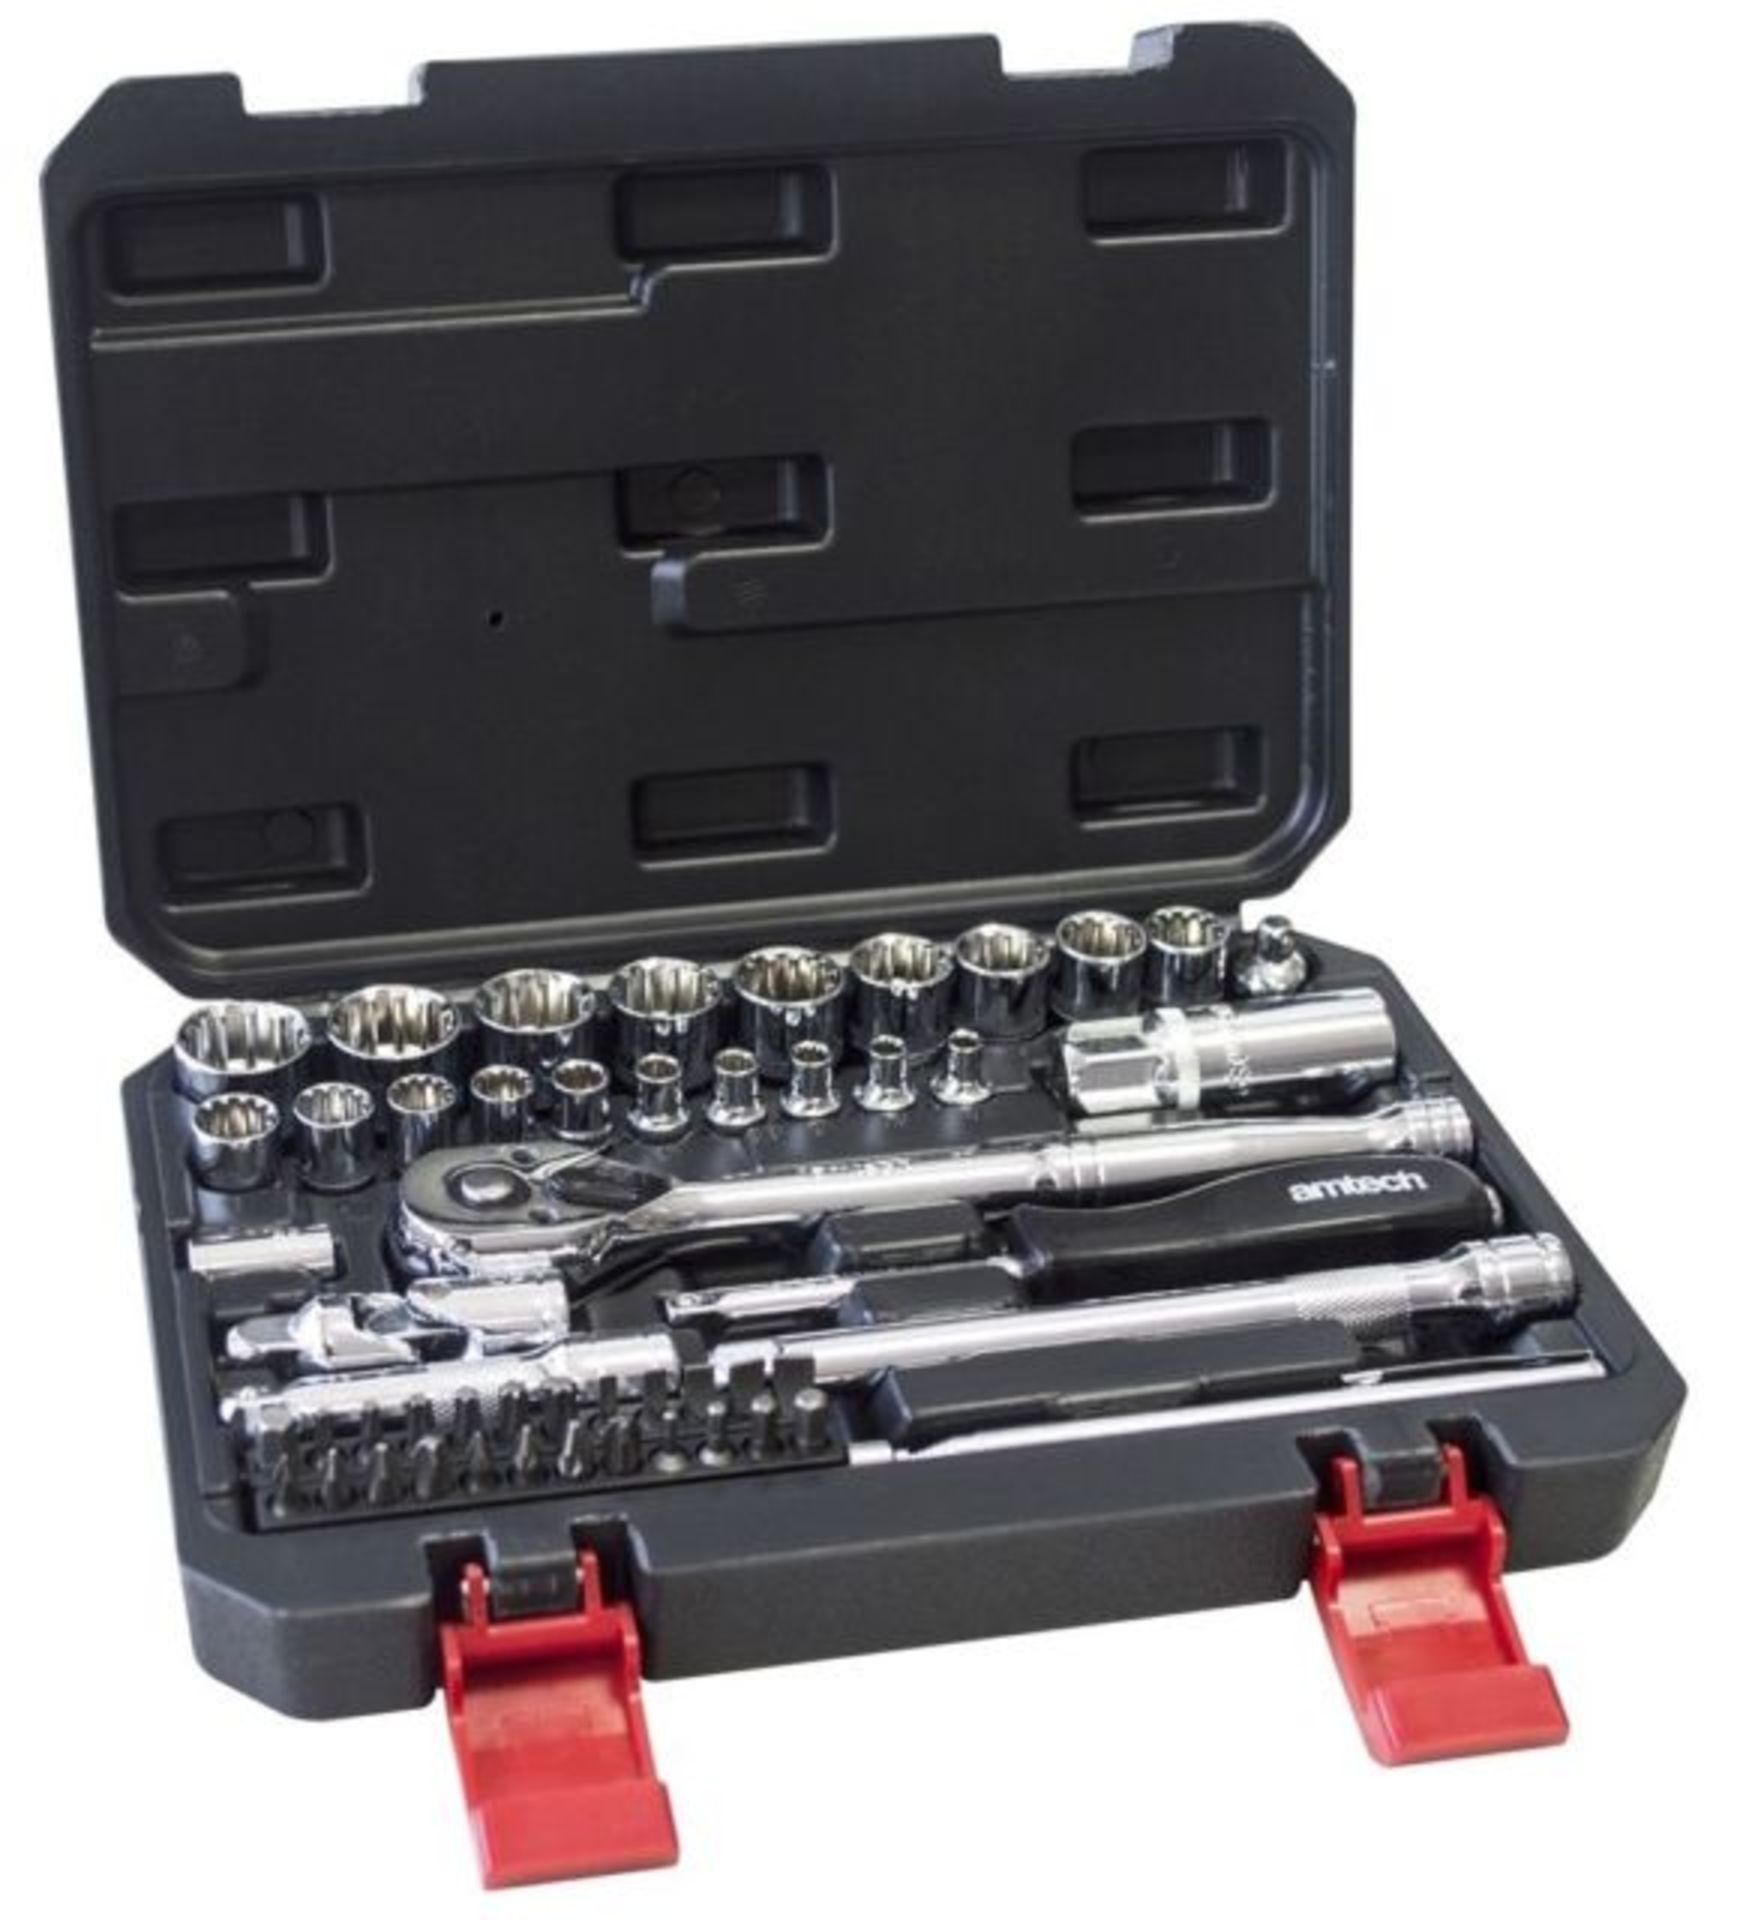 V Brand New 3/8 inch 12 Point Drive Socket Set Incl Quick Release Ratchet, Spinner Handle, 2 x